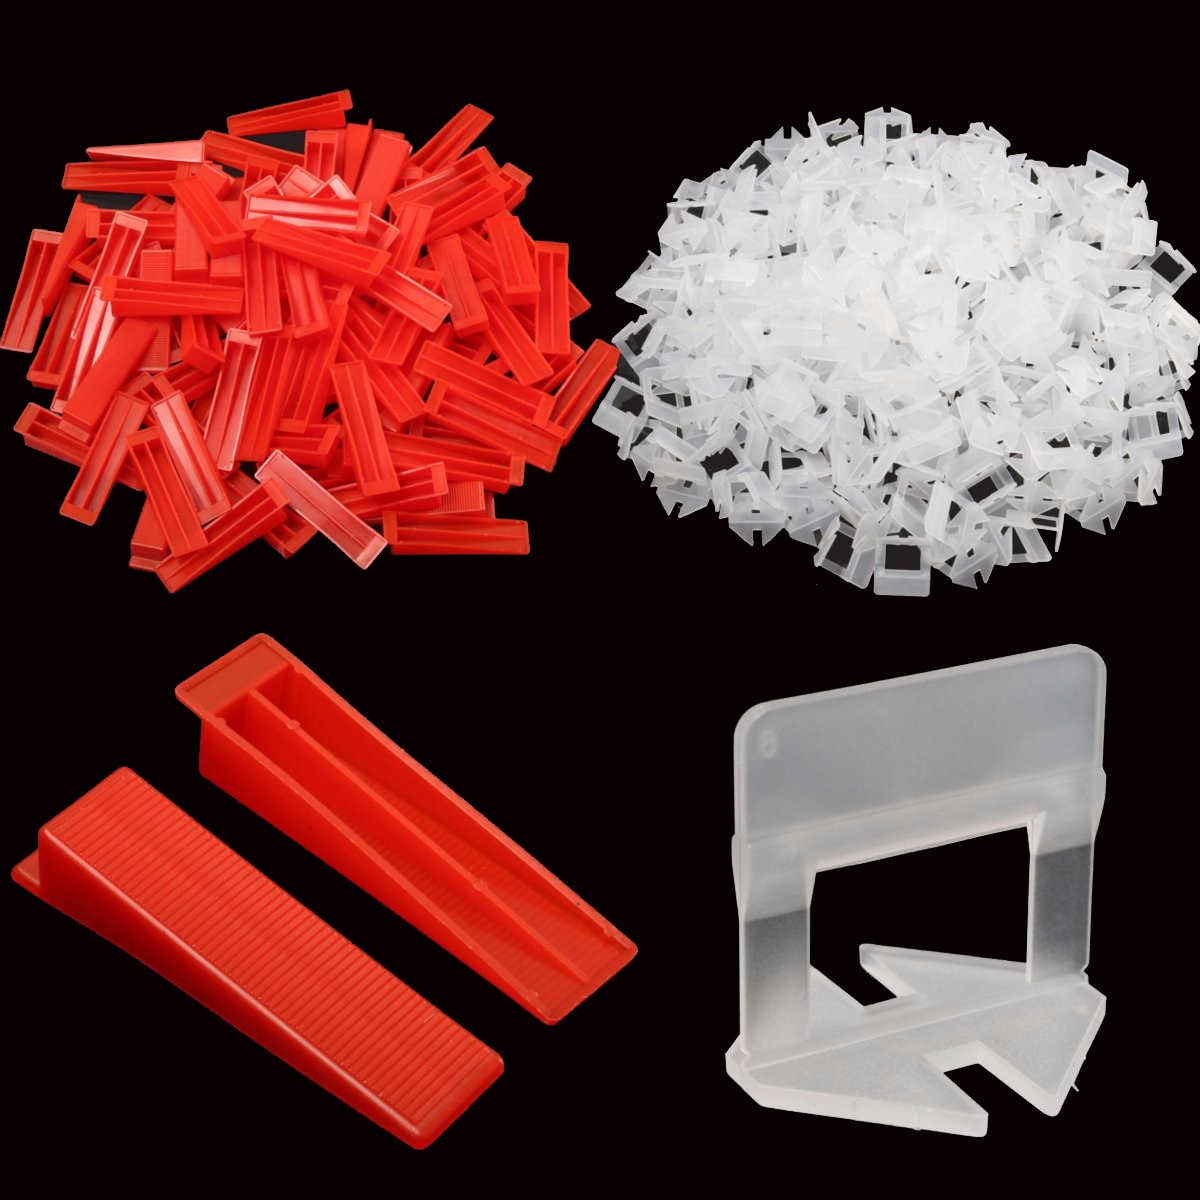 

901pcs/set Tile Spacers Tiling Leveling System 700pcs Clips and 200pcs Wedges with 1pc Plier Floor Spacer